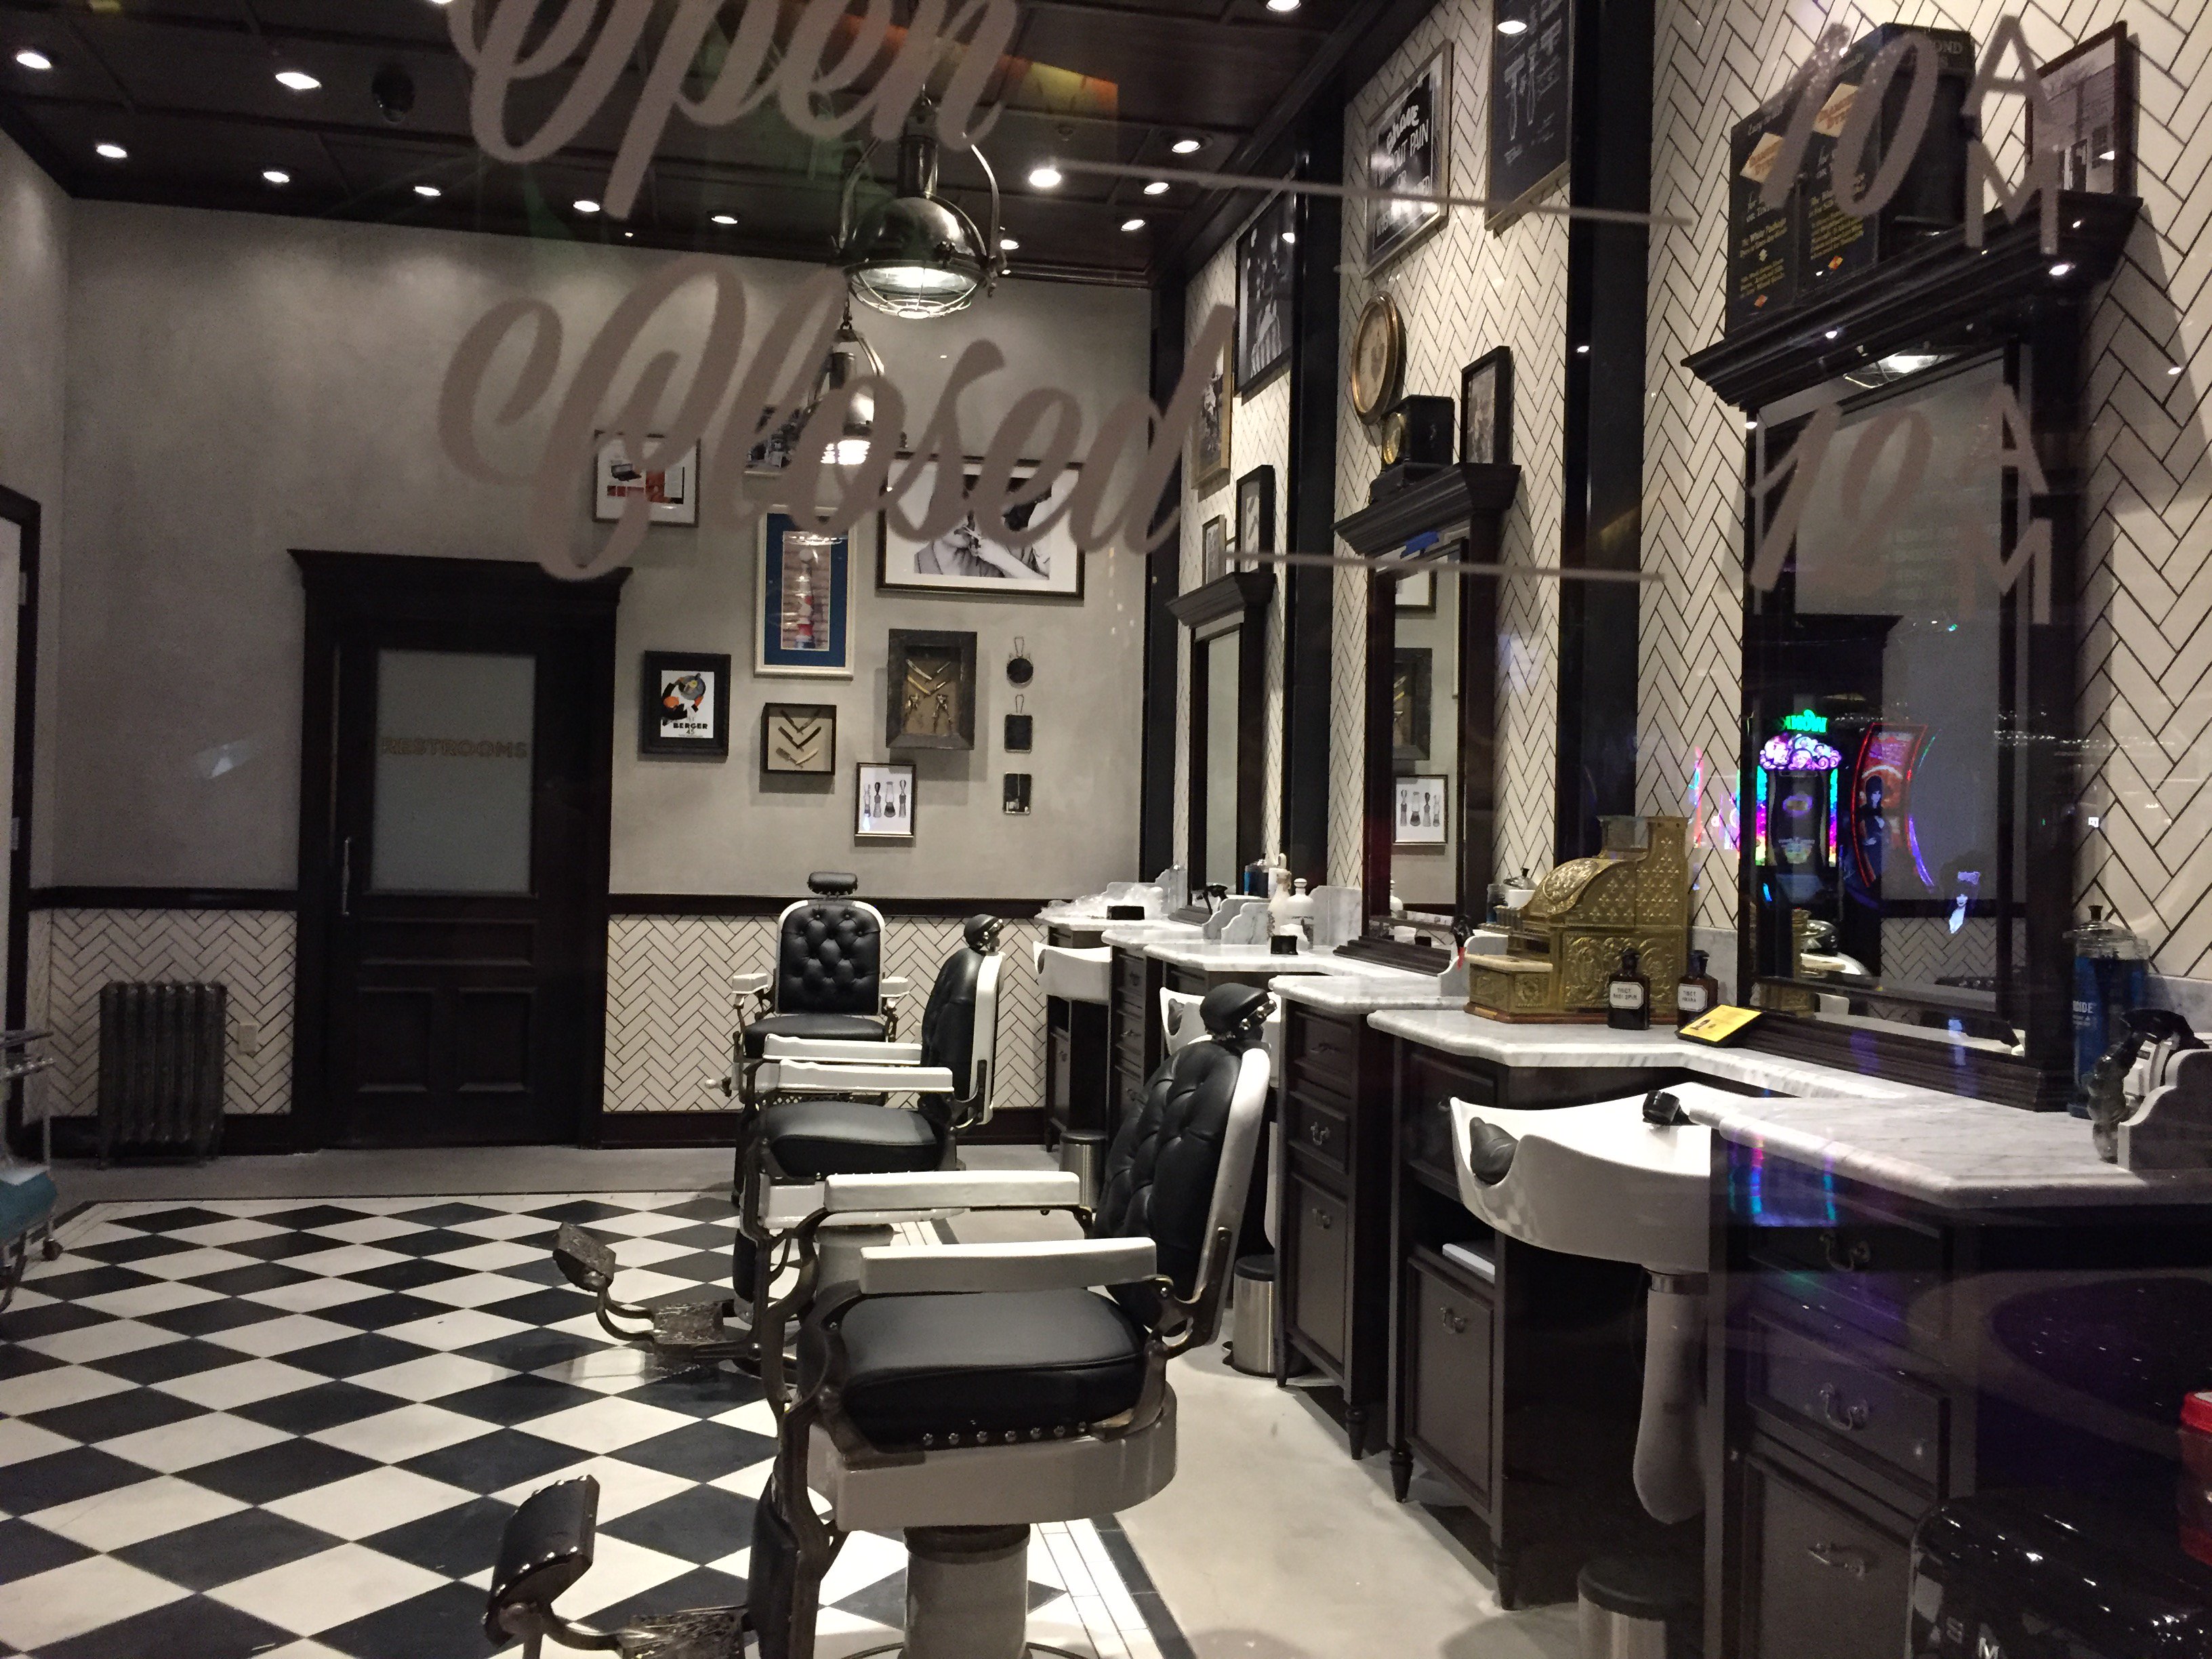 Its Cuts and Cocktails at The Barbershop in Las Vegas